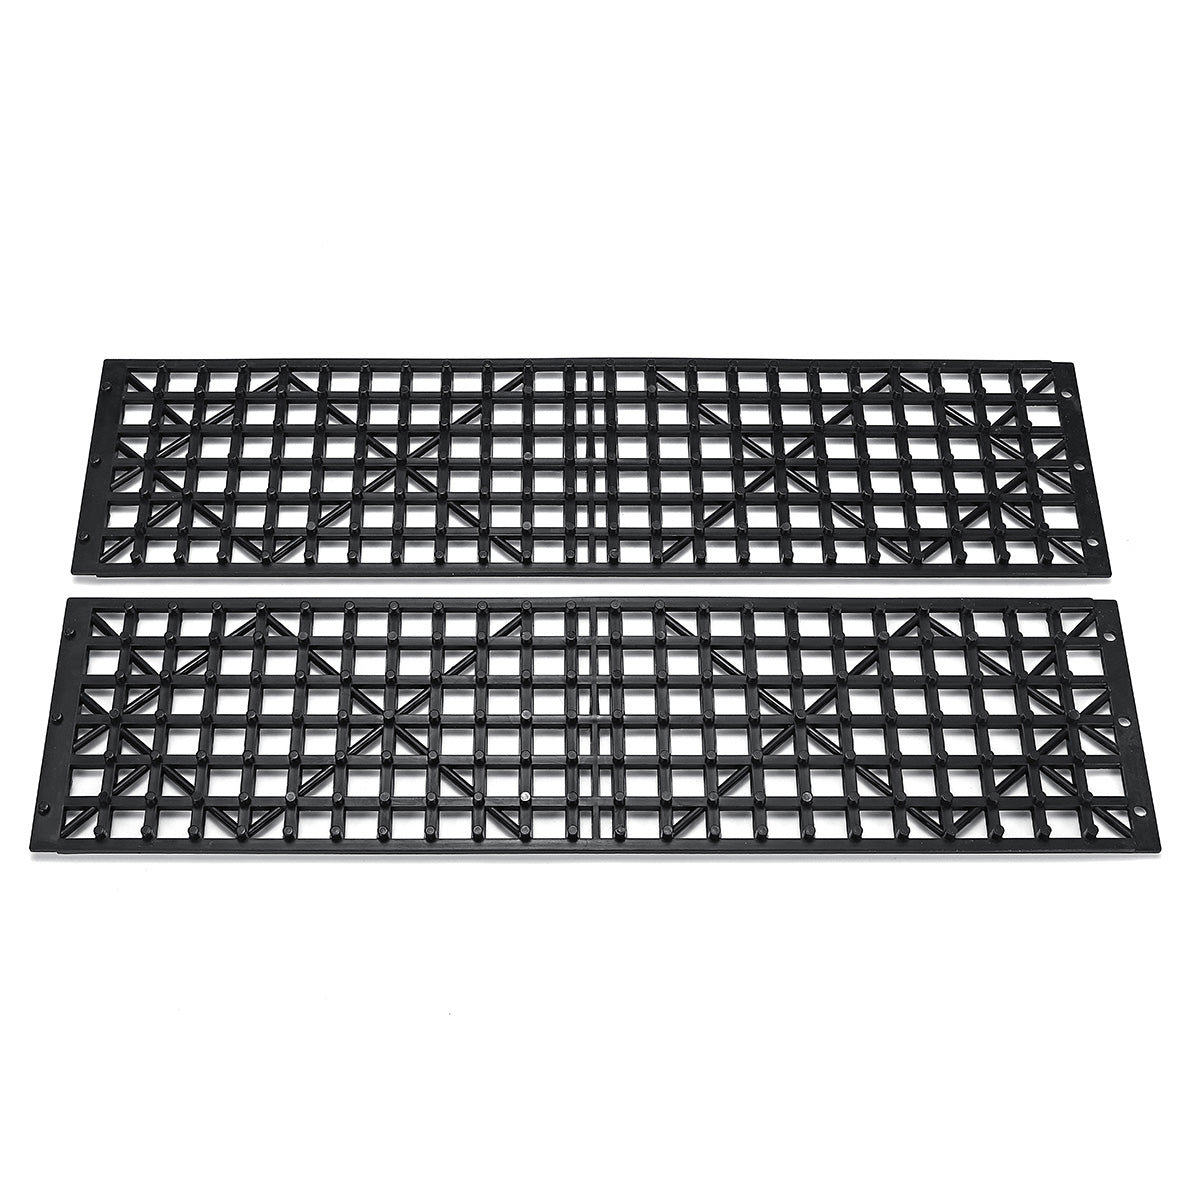 Pair Black Recovery Tracks Road Tyre Ladder Anti-skid Sand Track for Mud Sand Snow Grass - Auto GoShop